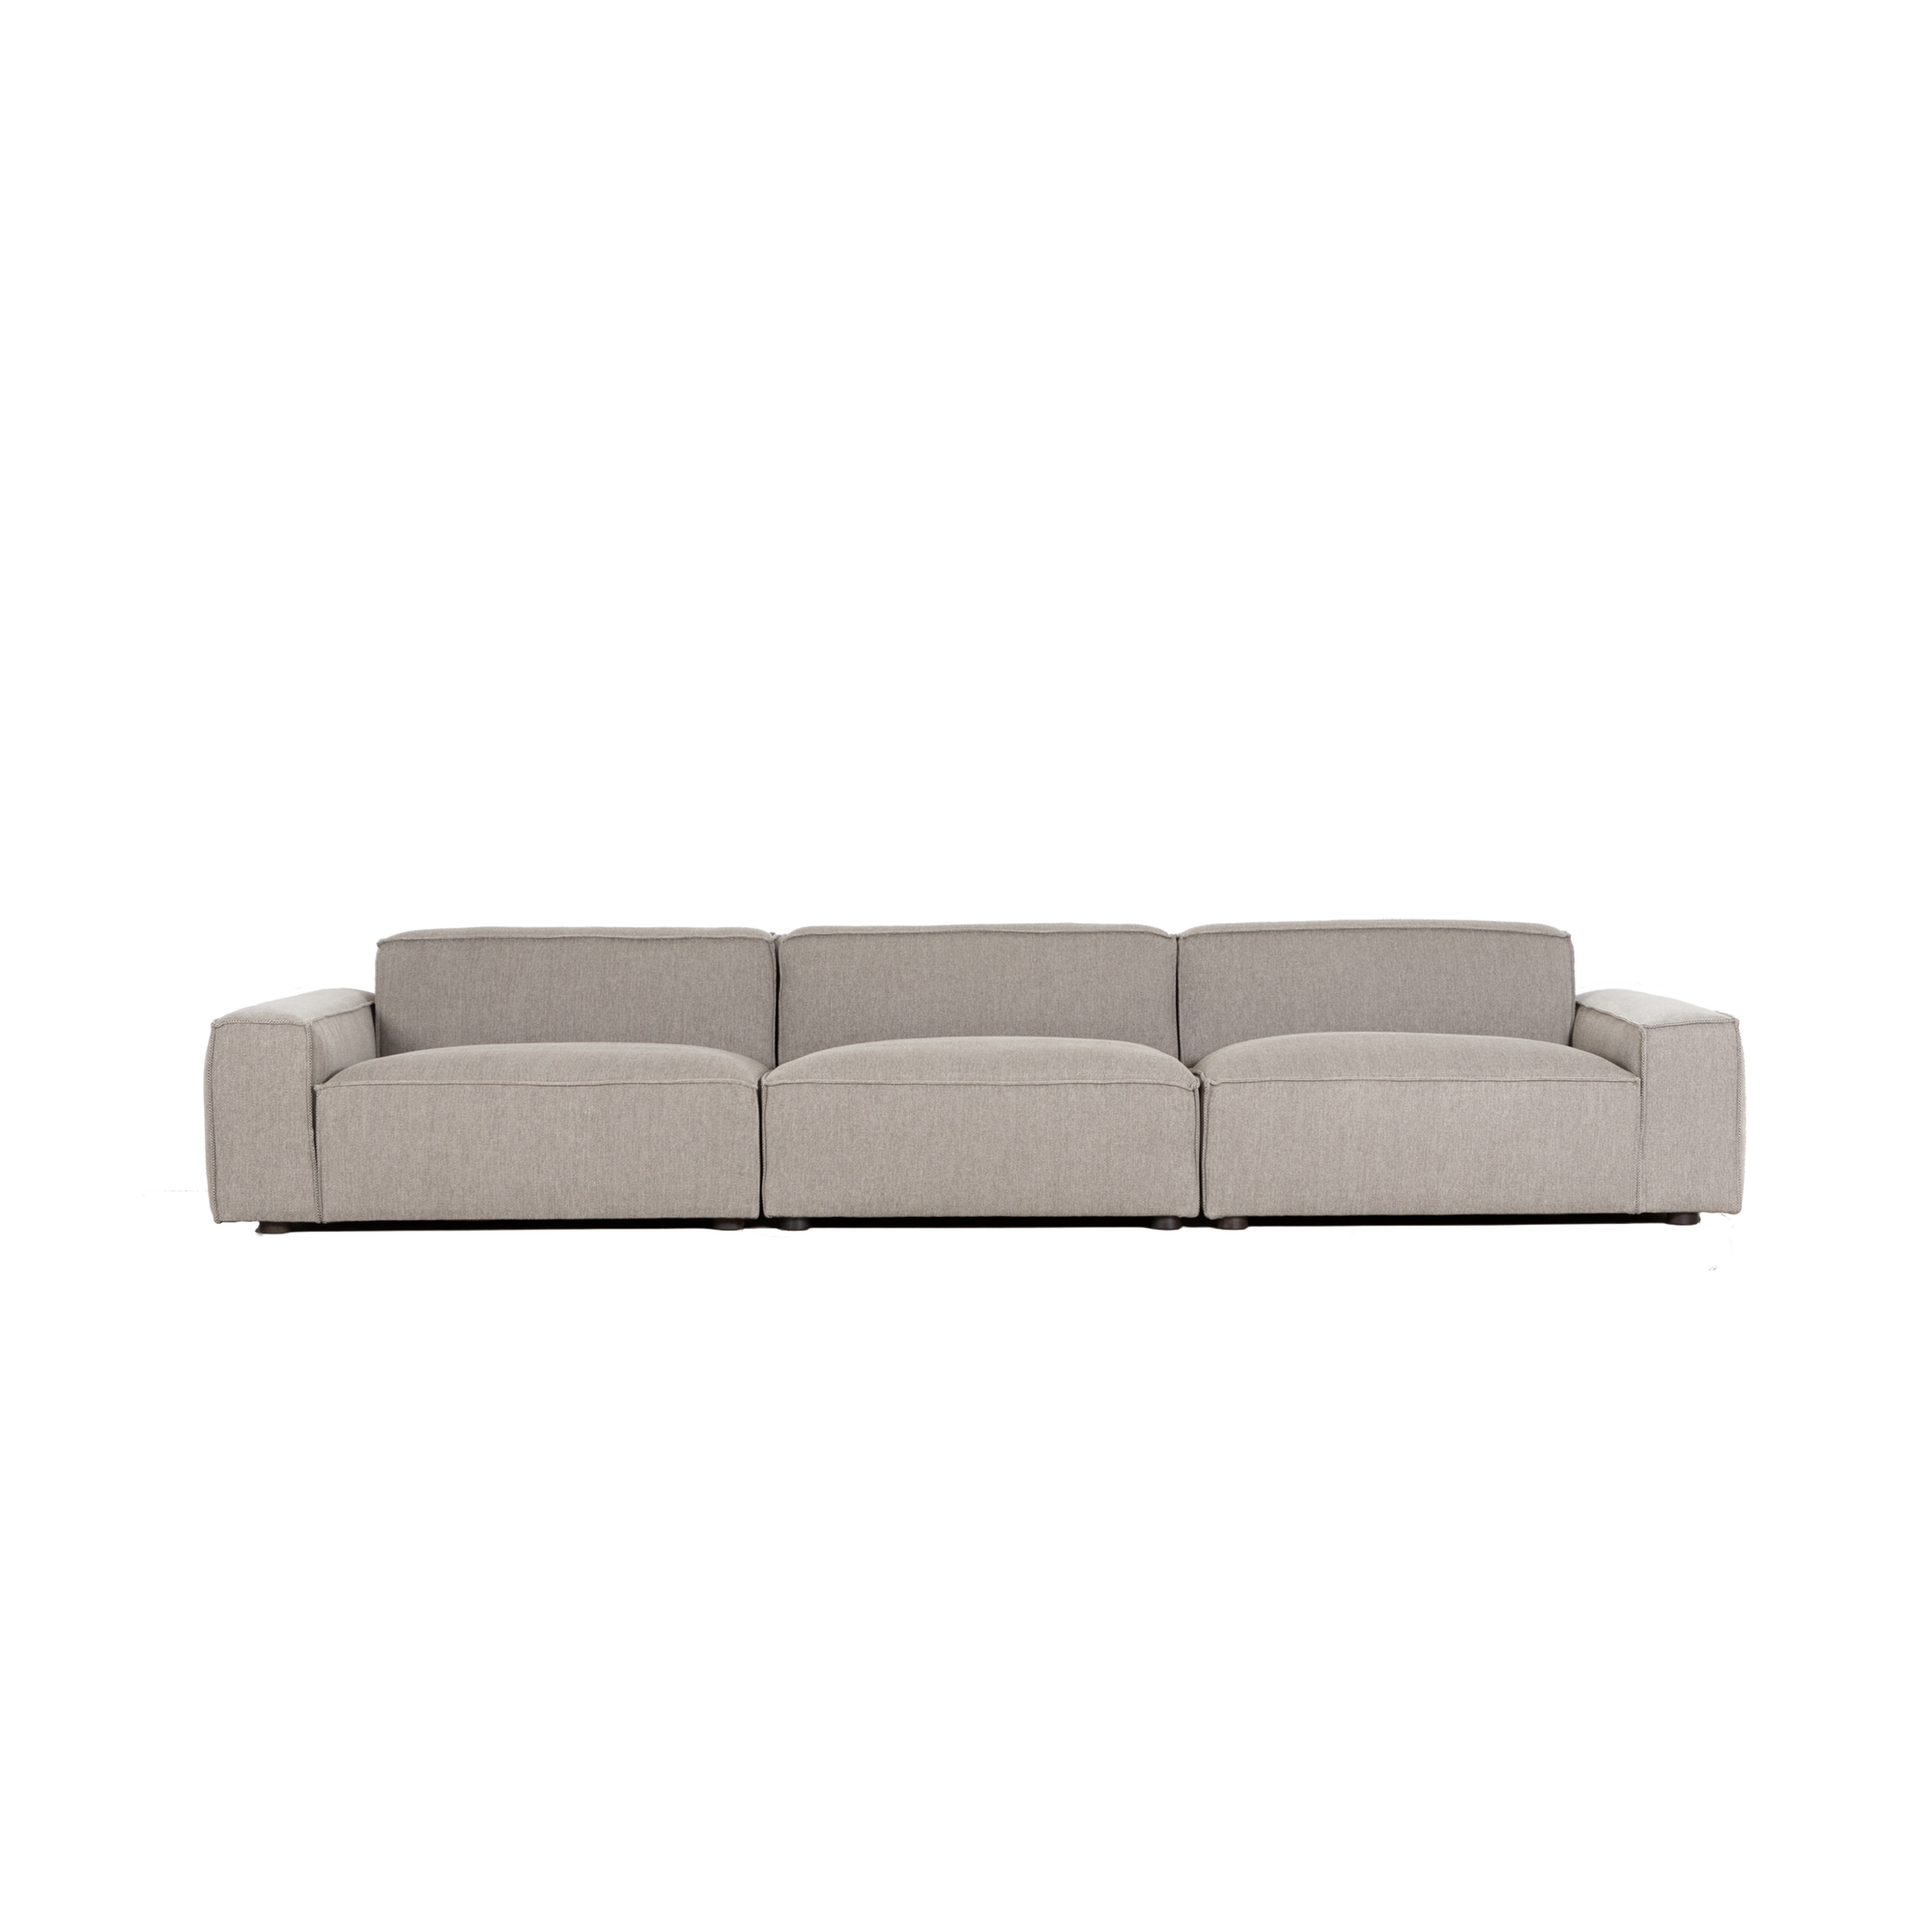 Unveil a new era of comfort and style with our Vetro Modular Sectional.